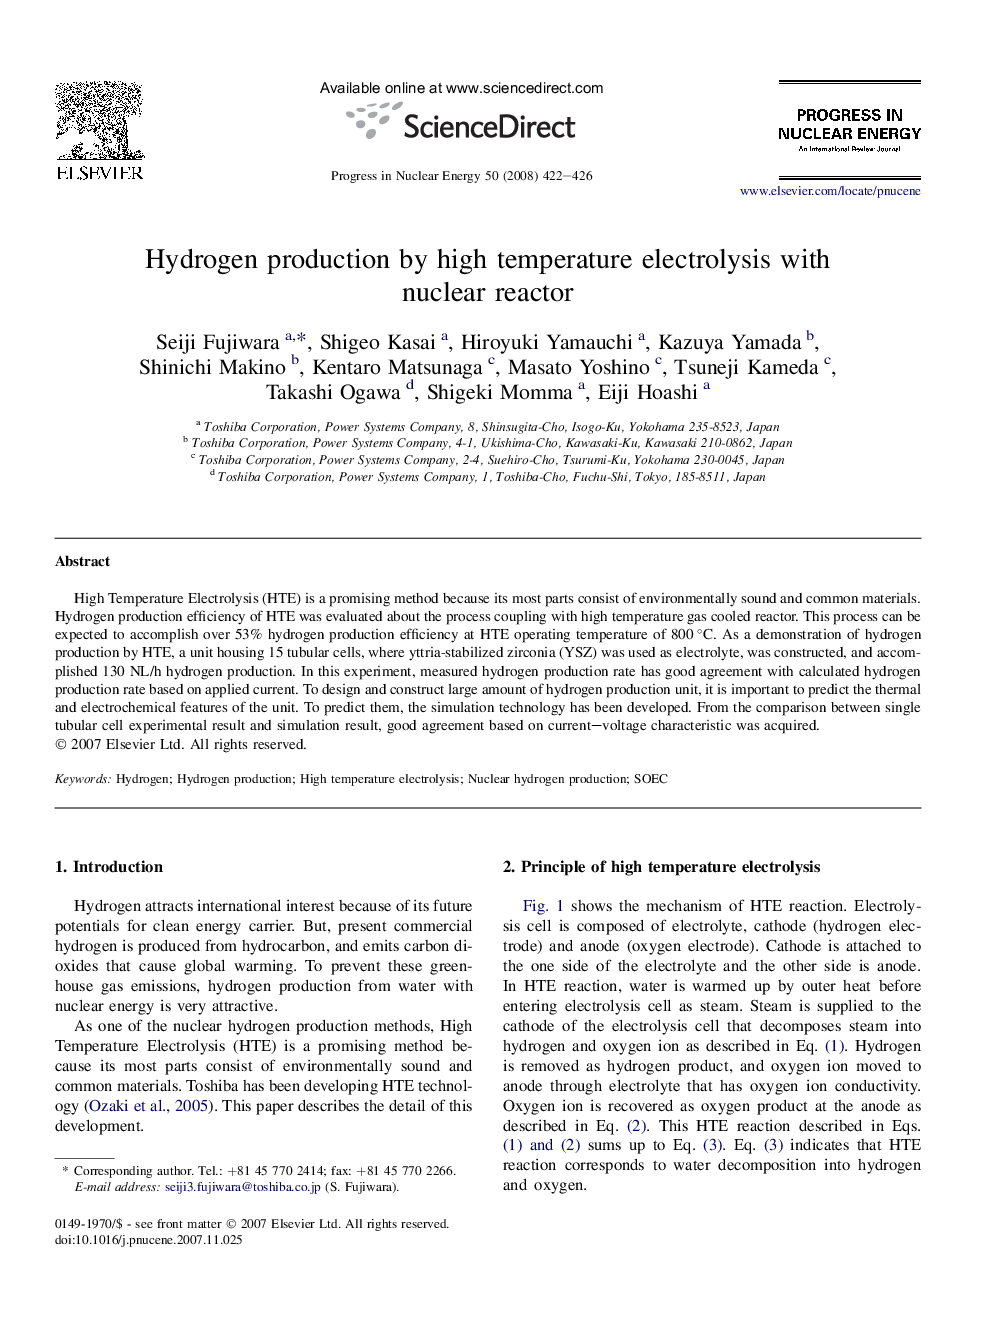 Hydrogen production by high temperature electrolysis with nuclear reactor